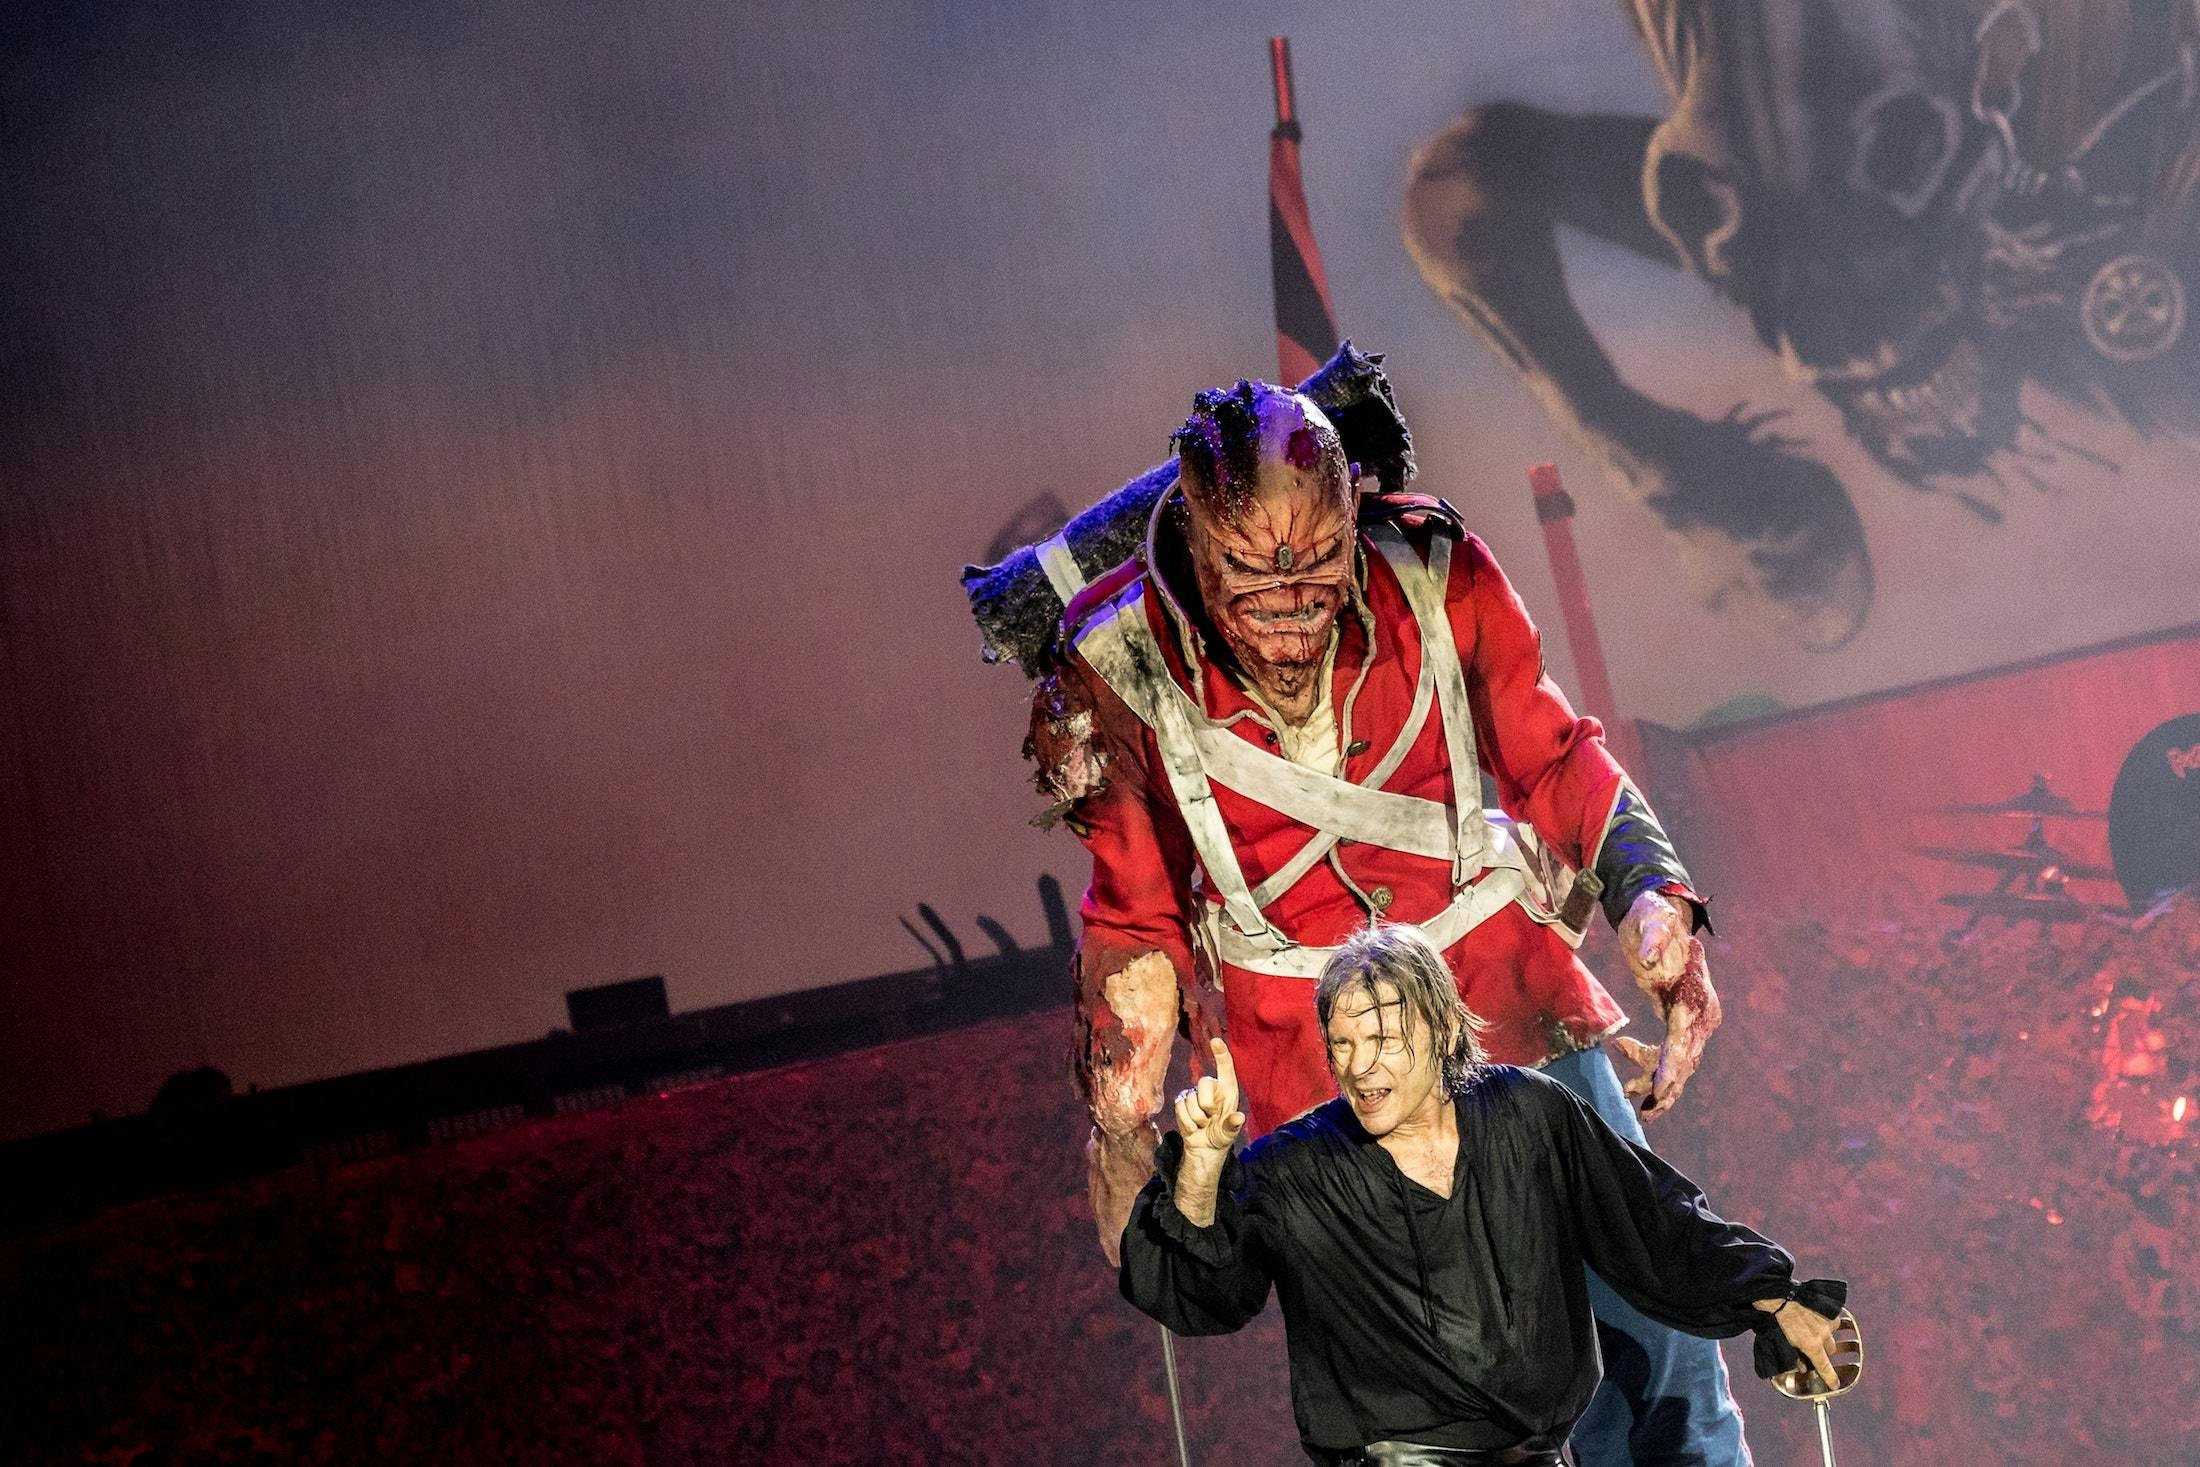 Gallery: Iron Maiden Crushed Birmingham And We Took Some Pictures